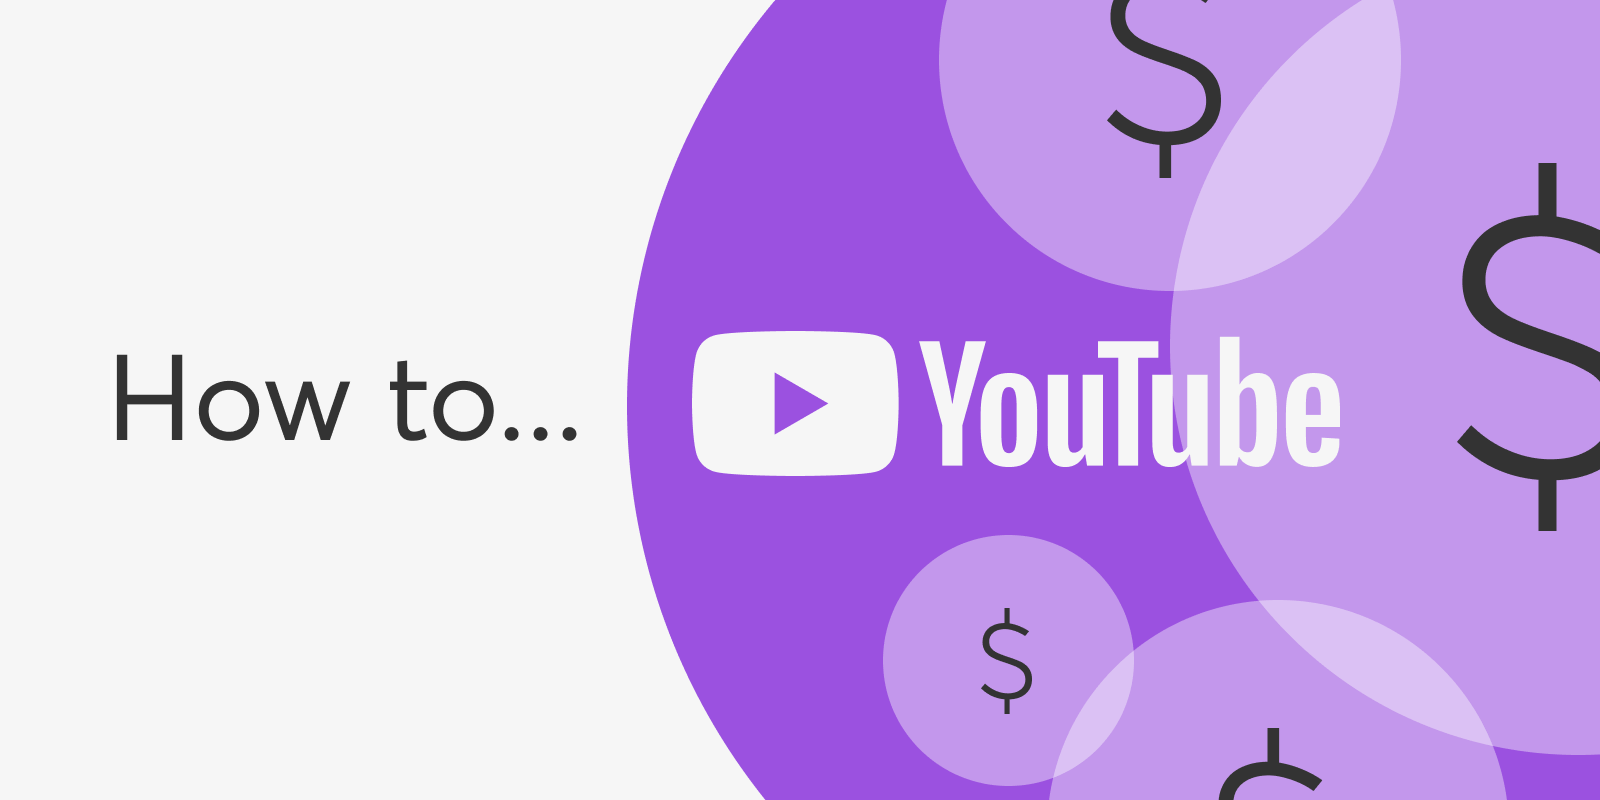 7 ways to monetize your youtube channel and the rules to do that.